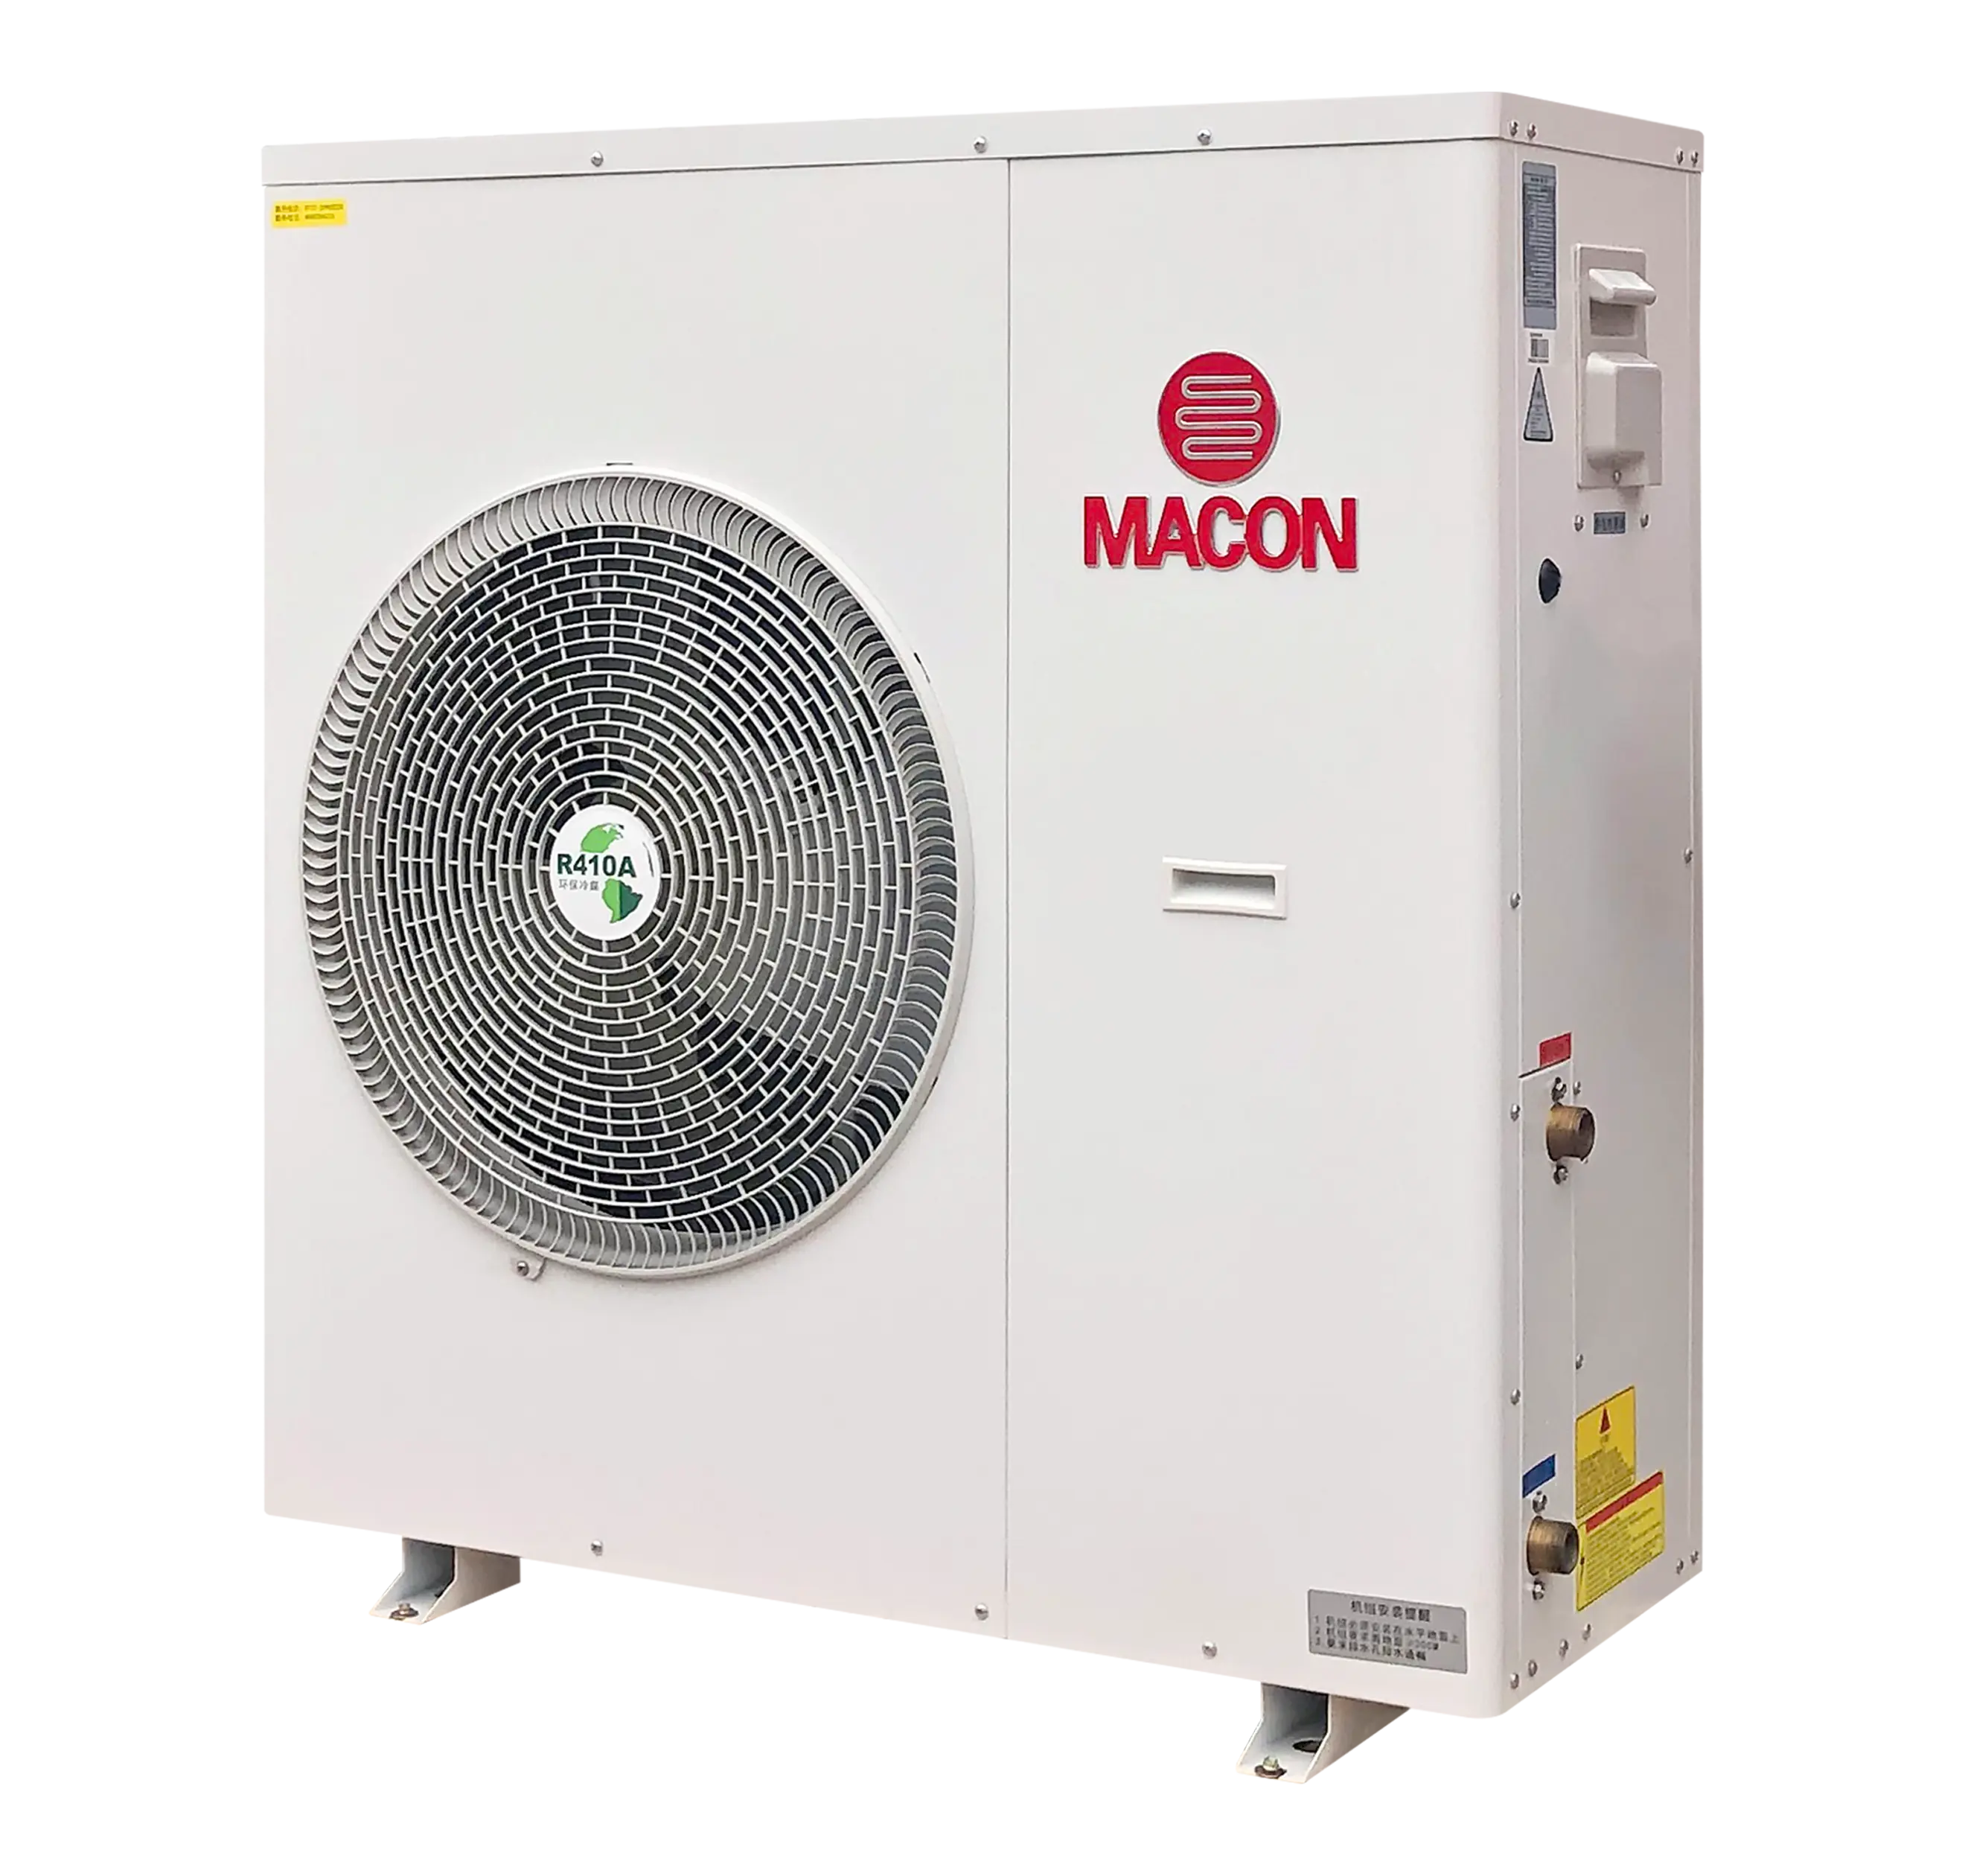 Macon ErP A+++ 9kw EVI DC inverter heat pump water heater heating cooling hot water for cold climate area with EN14511